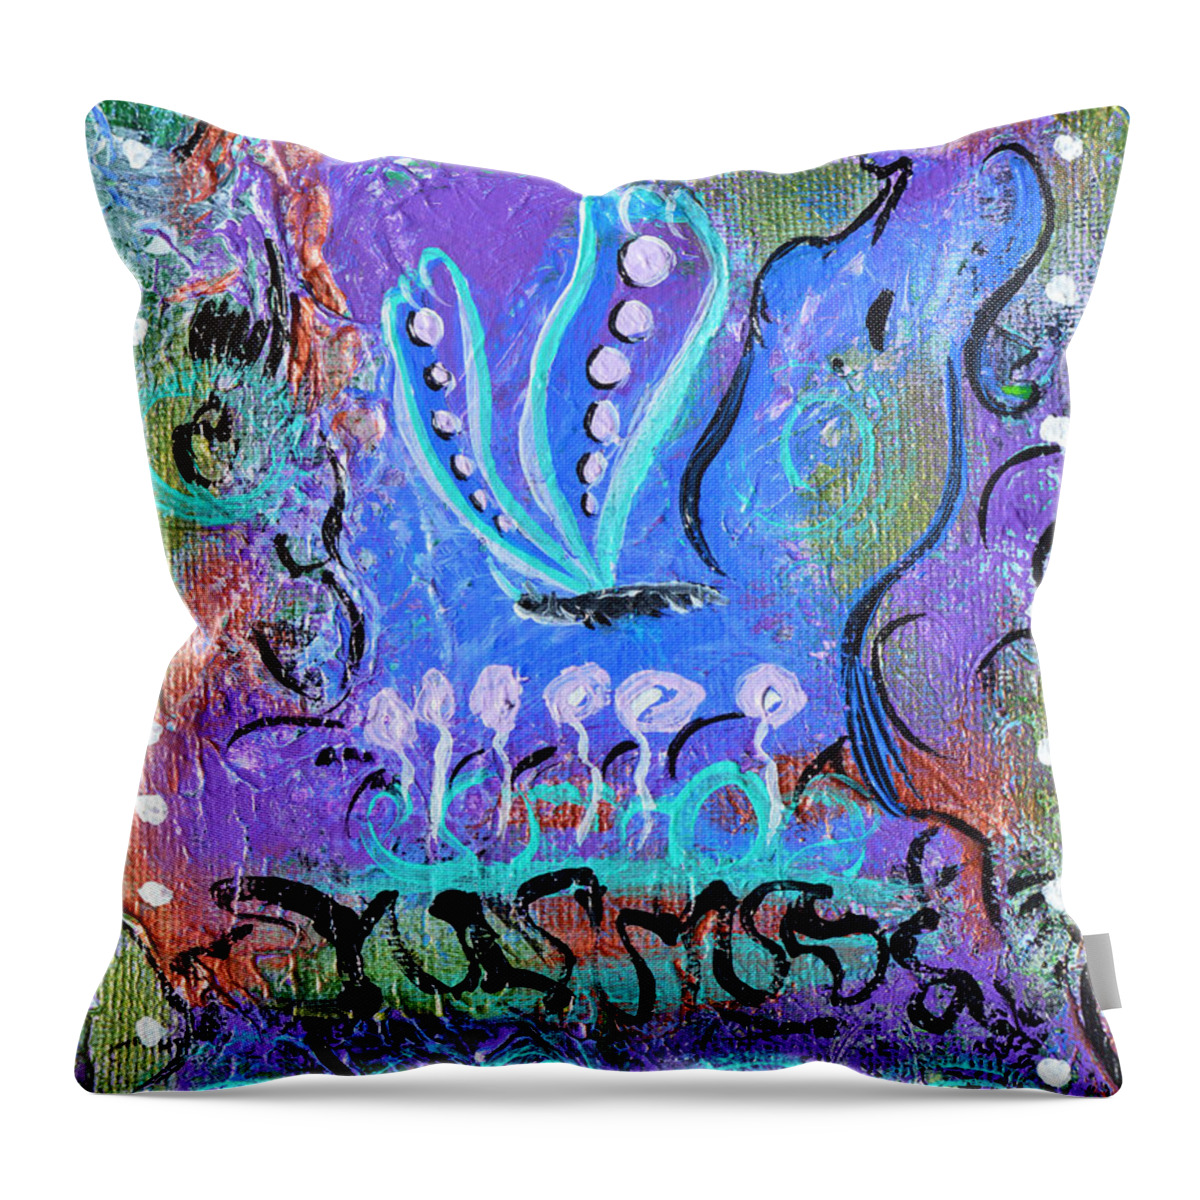 Reborn Throw Pillow featuring the painting New Life by Donna Blackhall